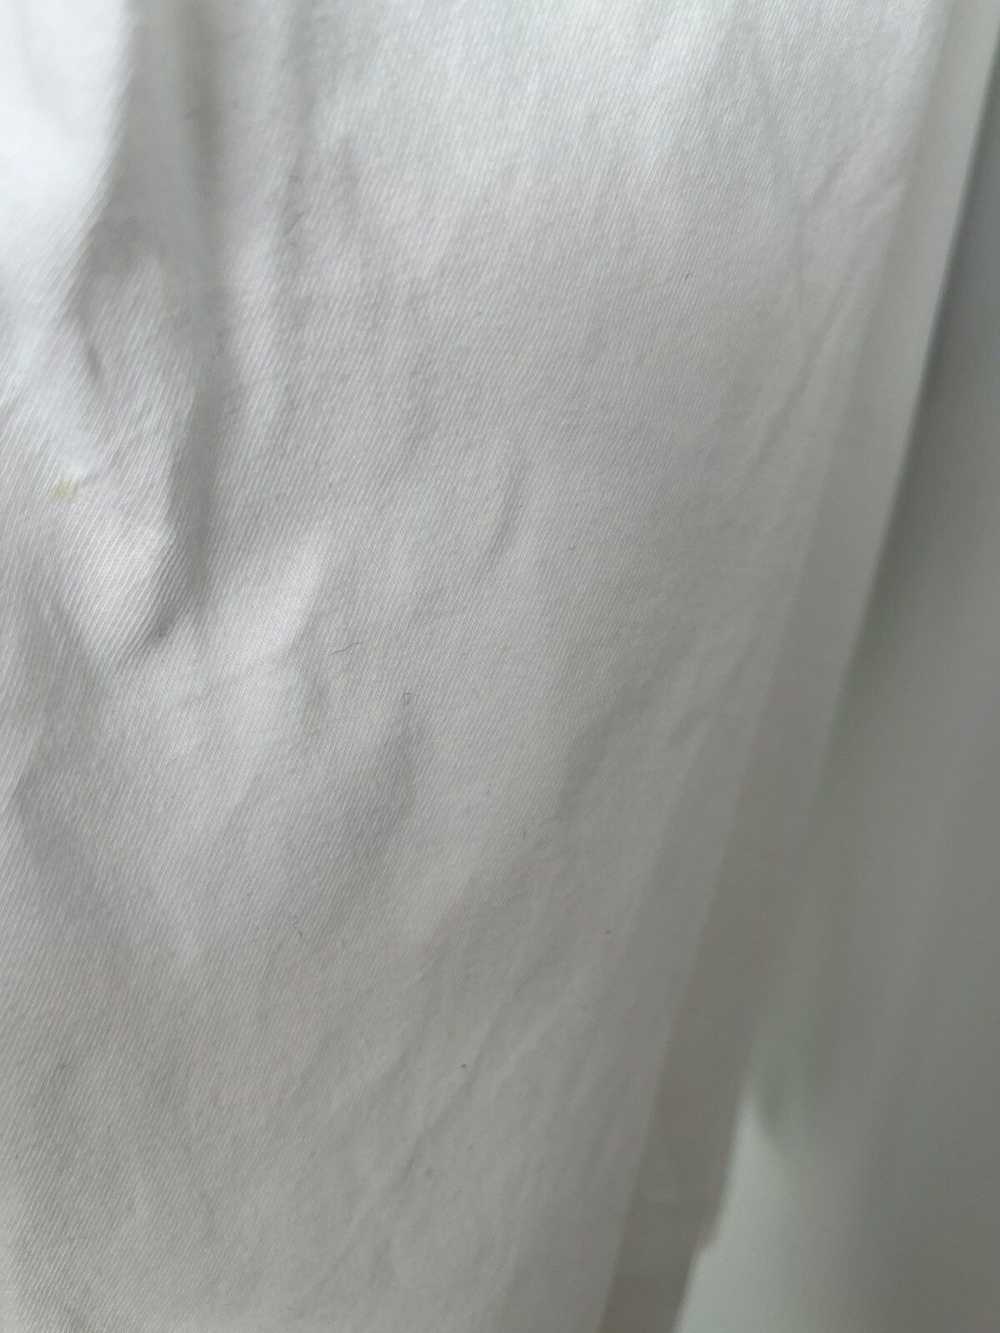 Undercover Undercover SS13 double layered tshirt - image 7